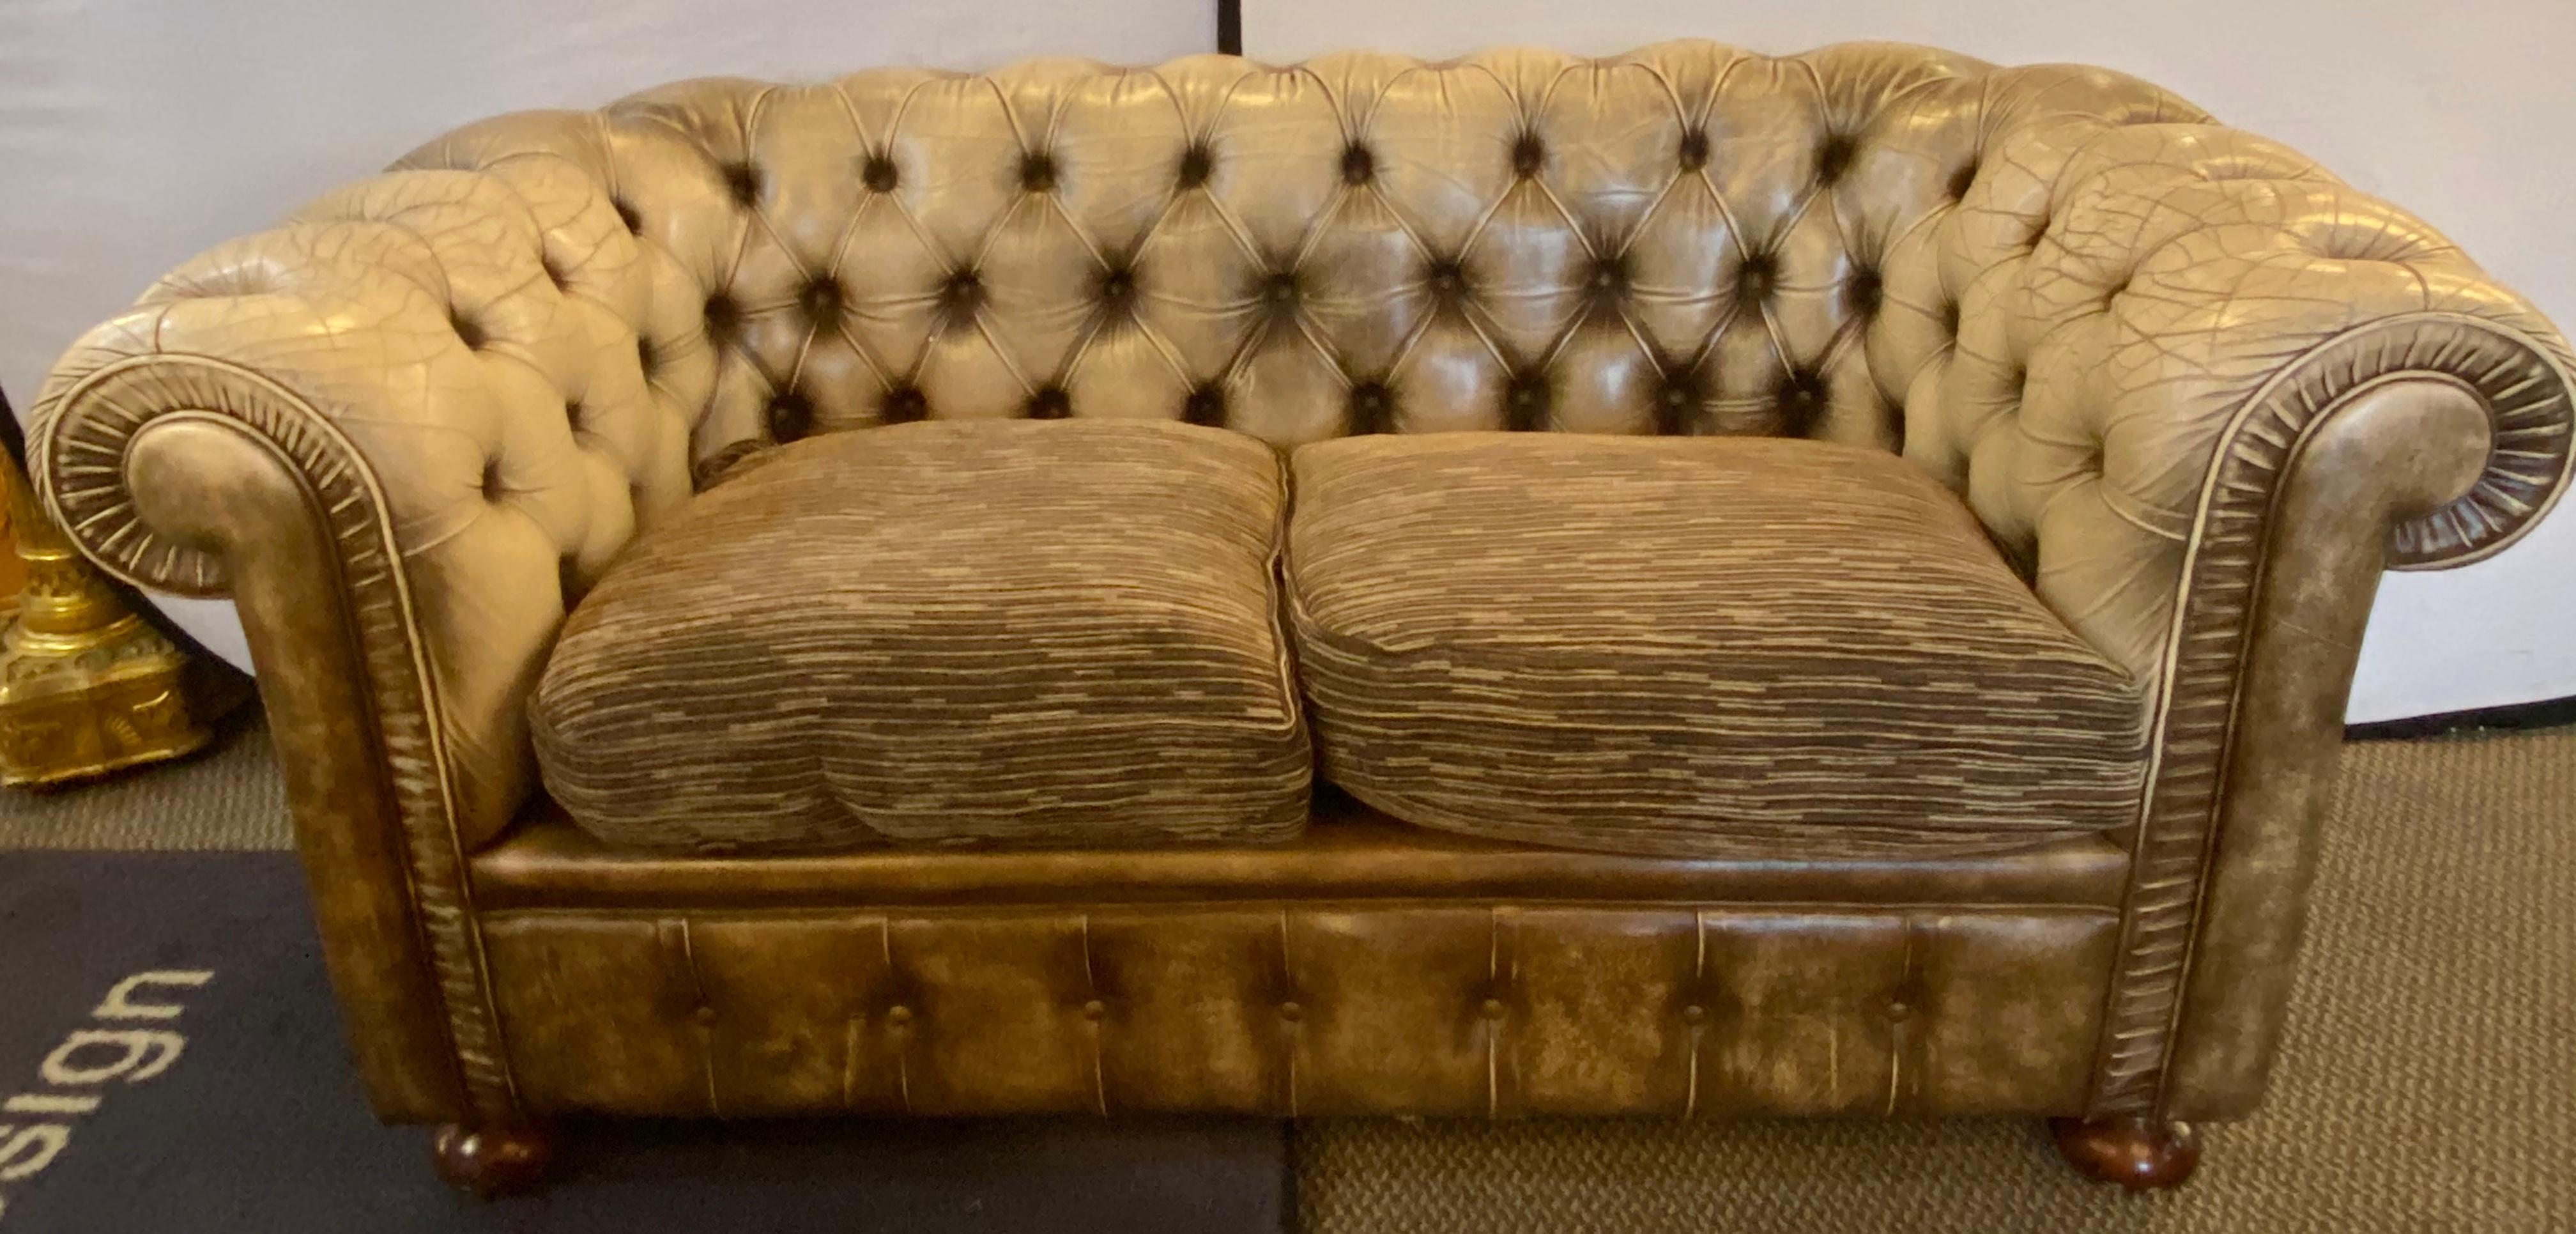 Chesterfield leather upholstered loveseat Sofa. This more than likely English Chesterfield has bun feet supporting a worn leather frame. The cushions are done in a designer fabric.
ELS.